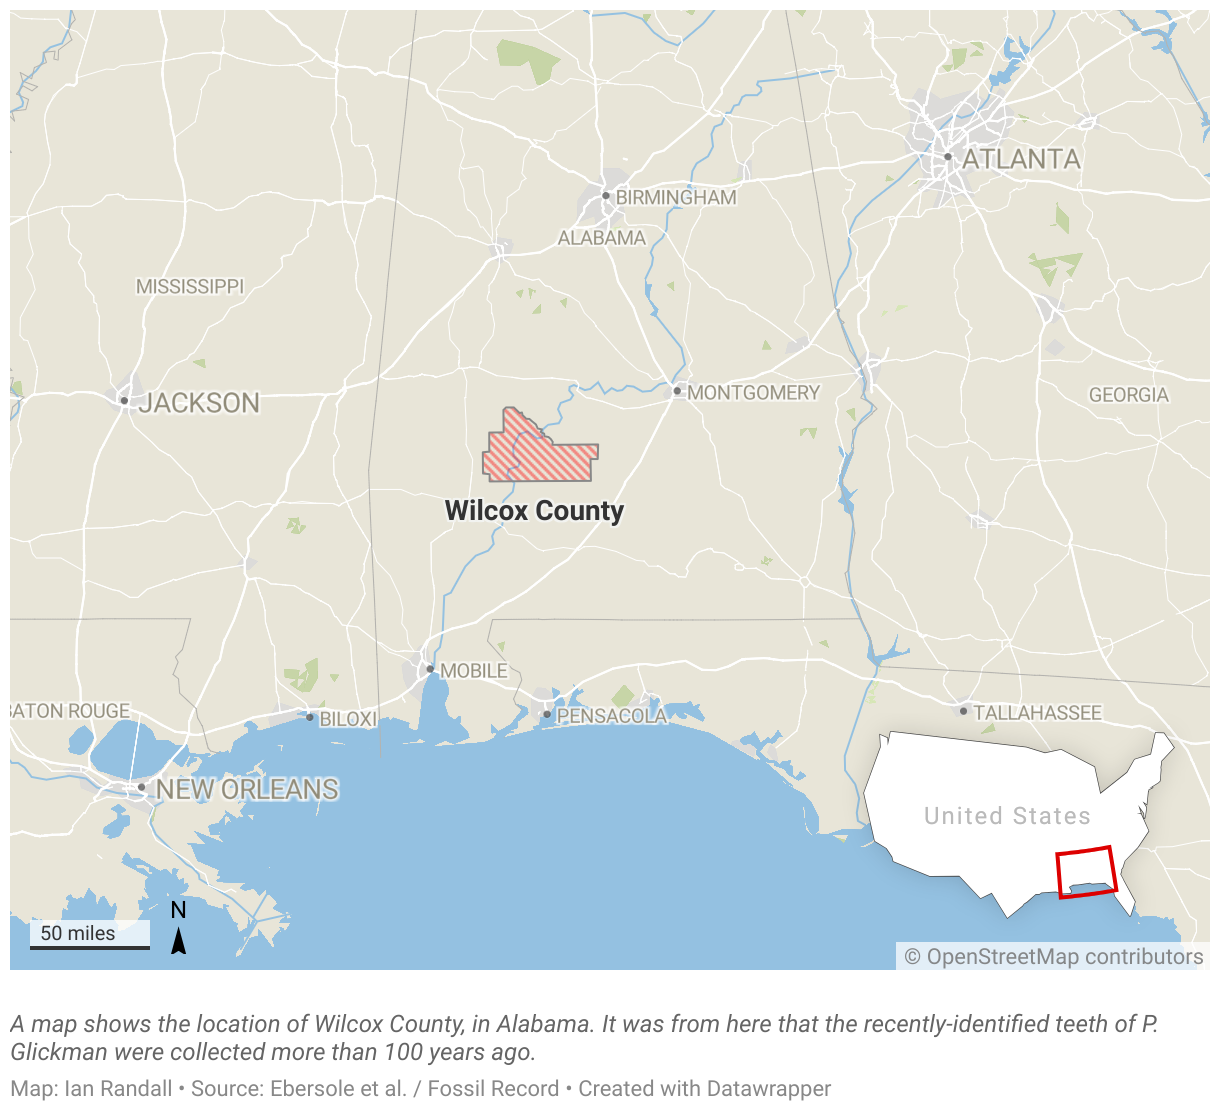 A map shows the location of Wilcox County, in Alabama.